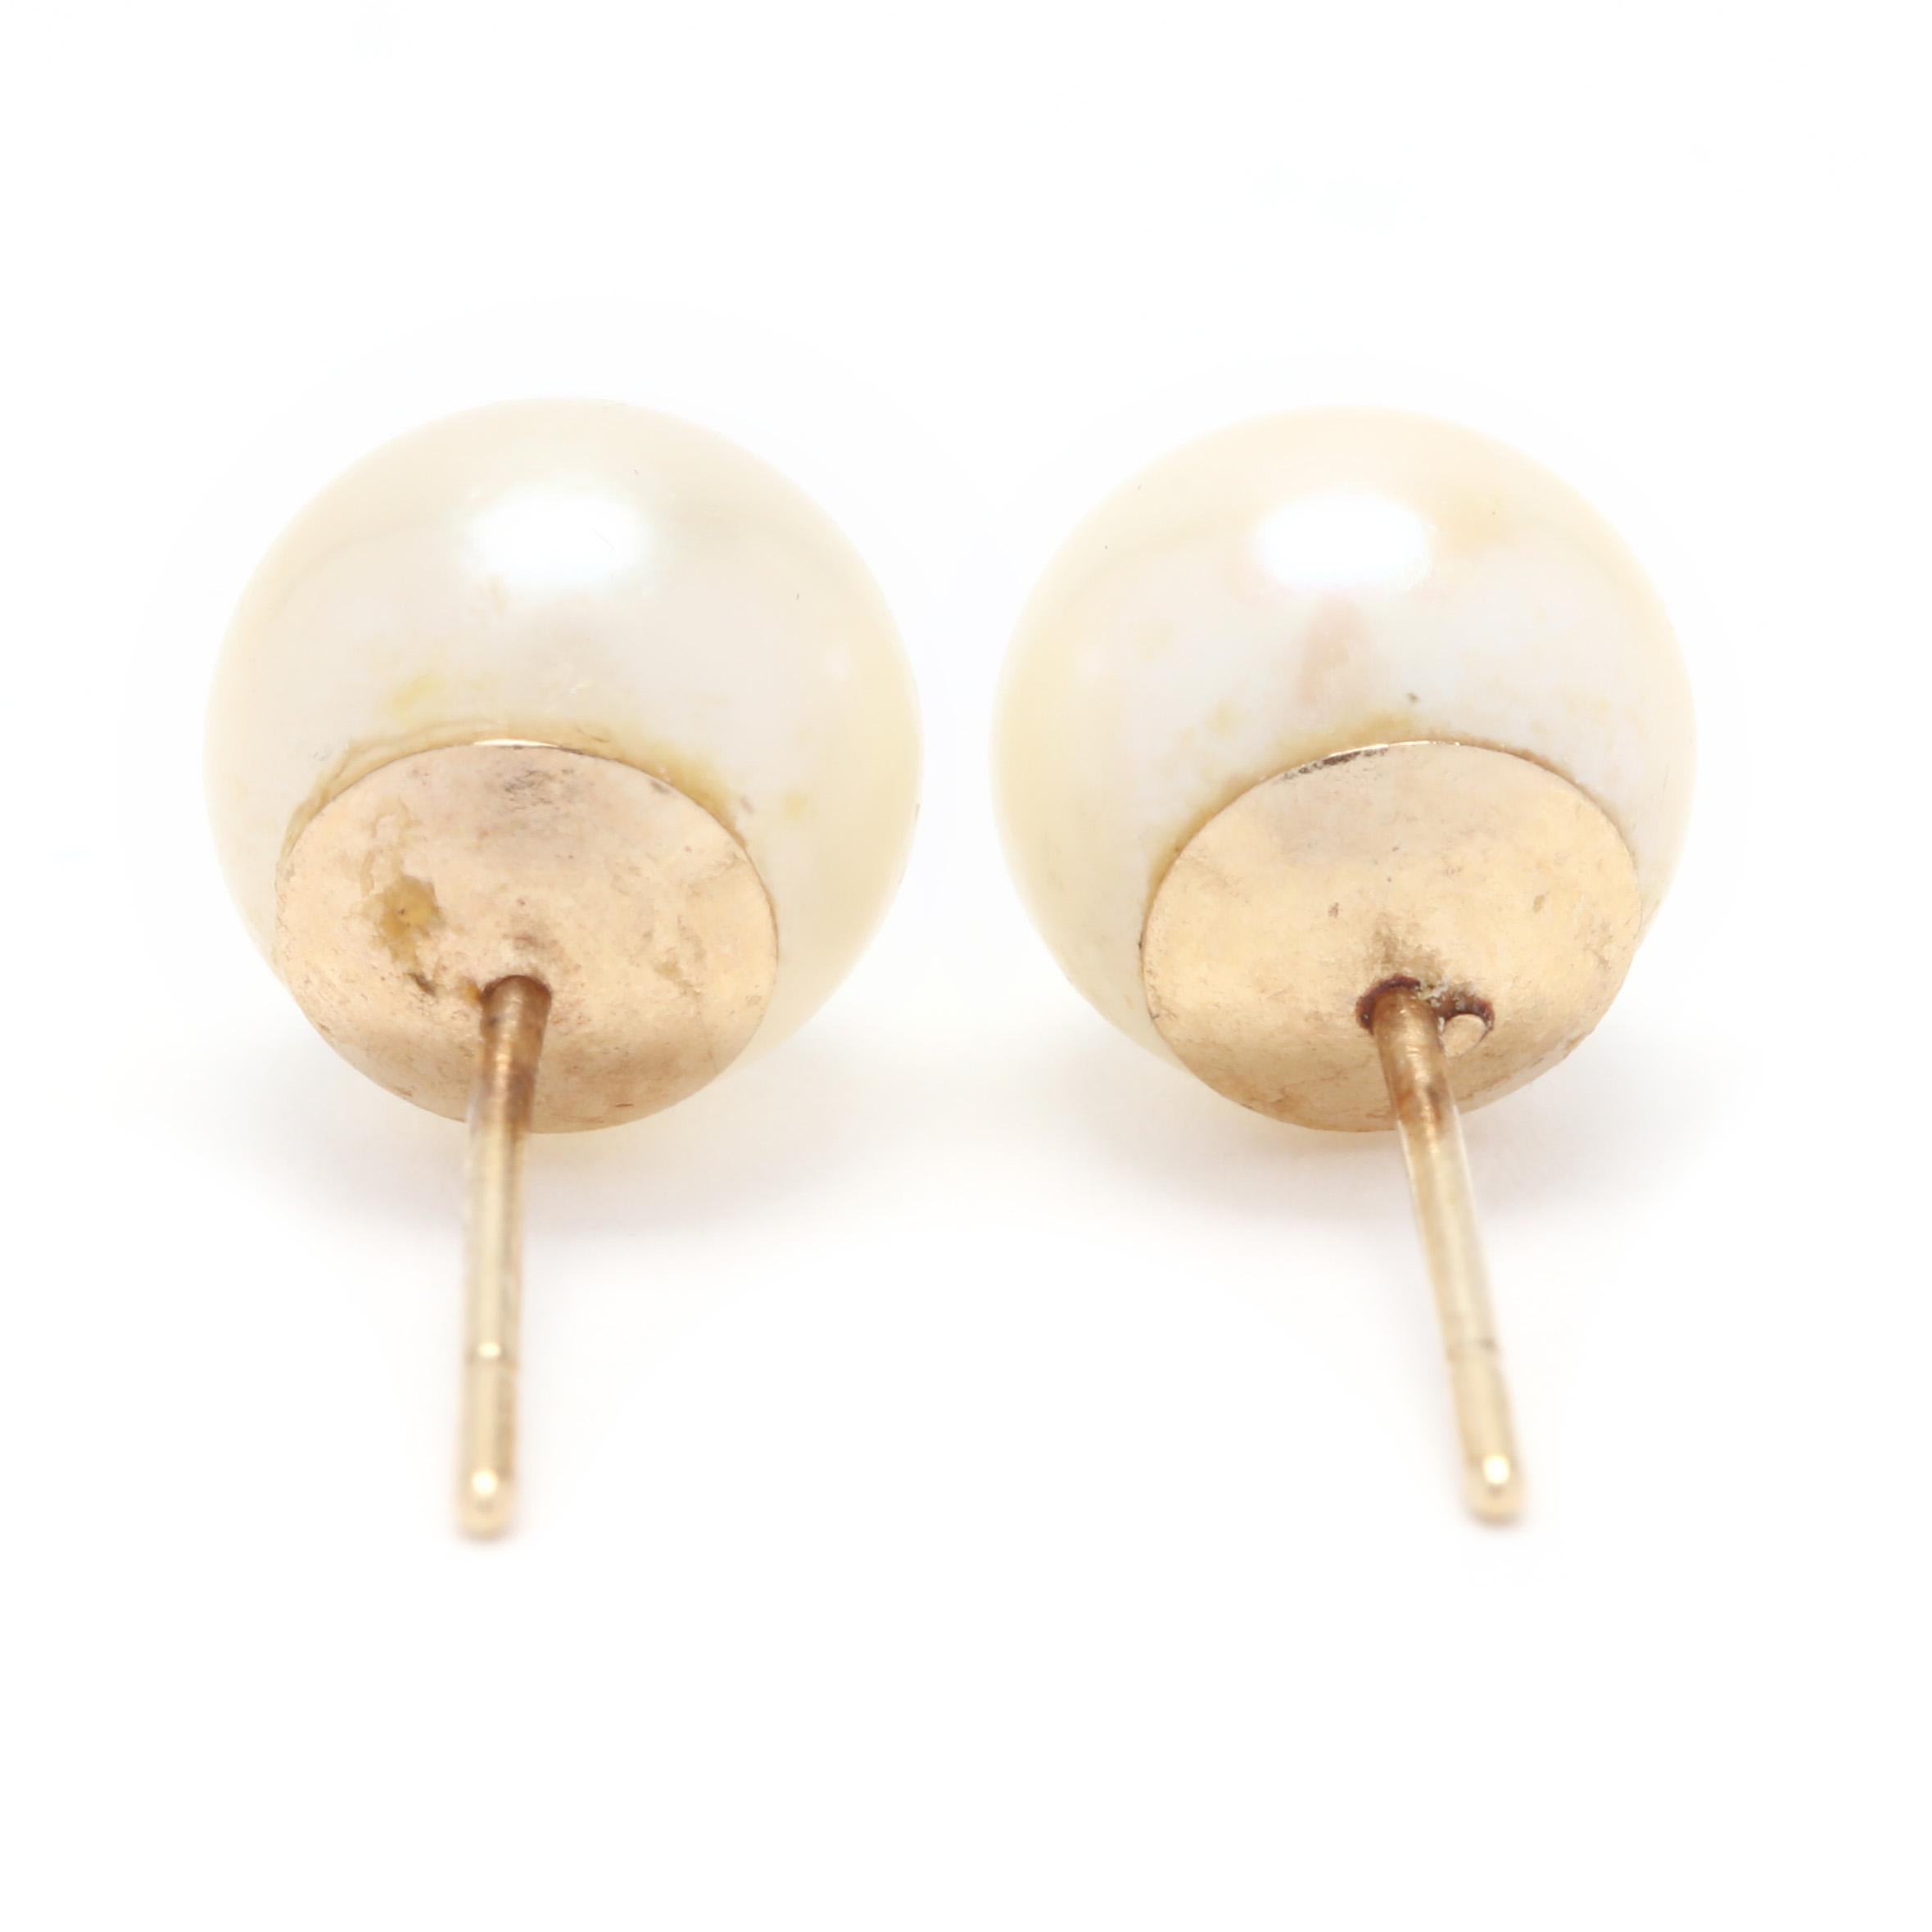 A pair of 14 karat yellow gold and pearl stud earrings. These earrings feature two round cream pearls (7.15 mm) with rose overtones, good luster and with push backs.

Stones:
- pearls
- round bead, 2 stones
- 7.15 mm

.91 dwts.

* Please note that